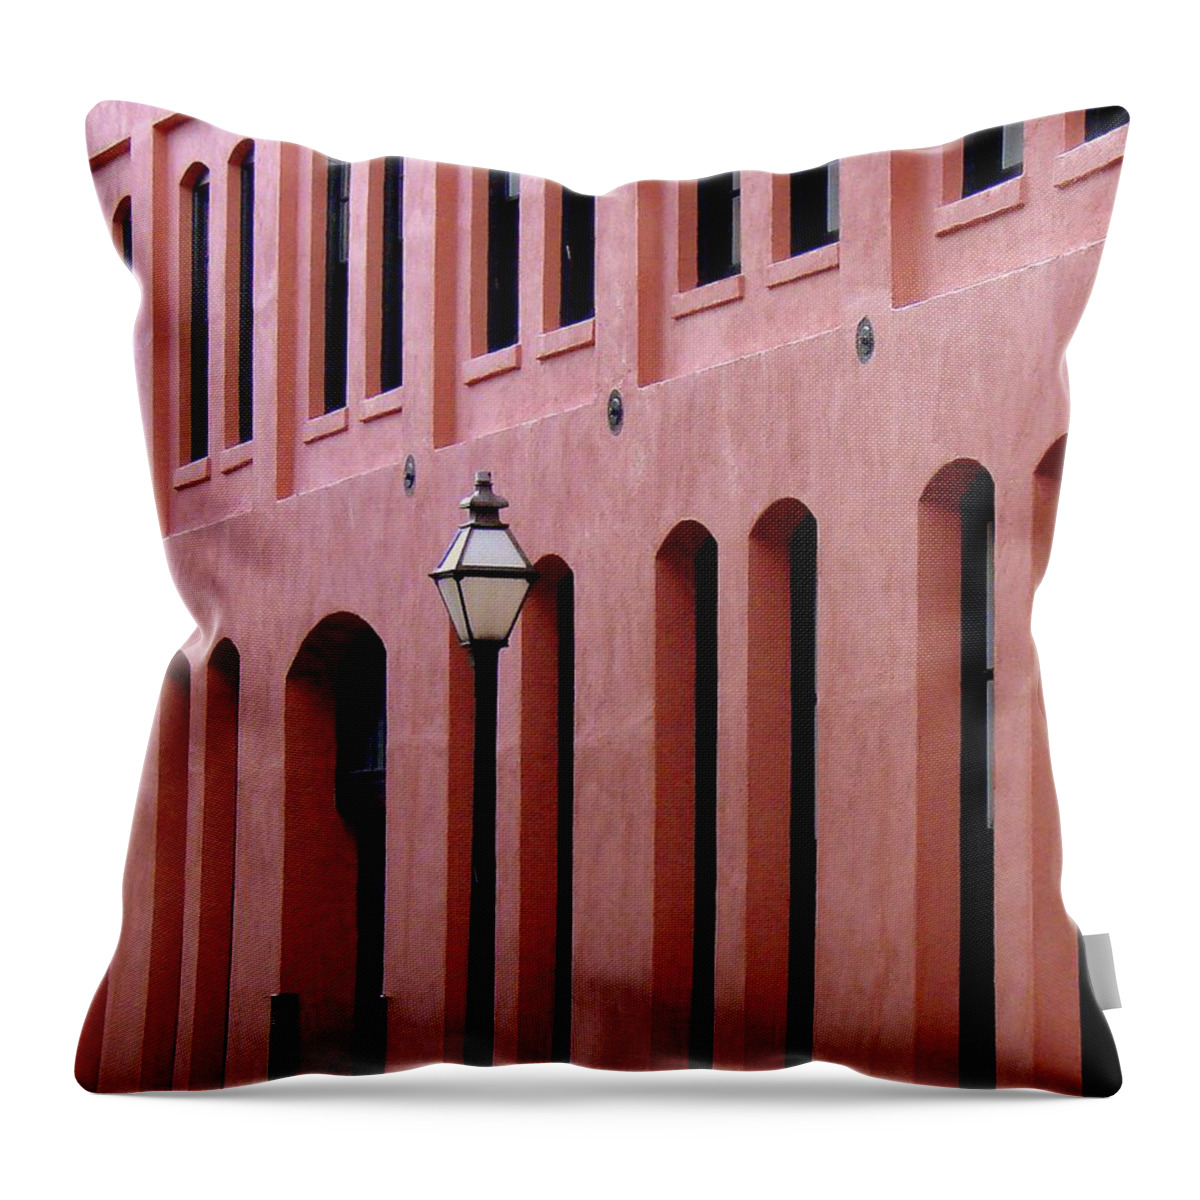 Abstract Throw Pillow featuring the photograph Linear by Rodney Lee Williams